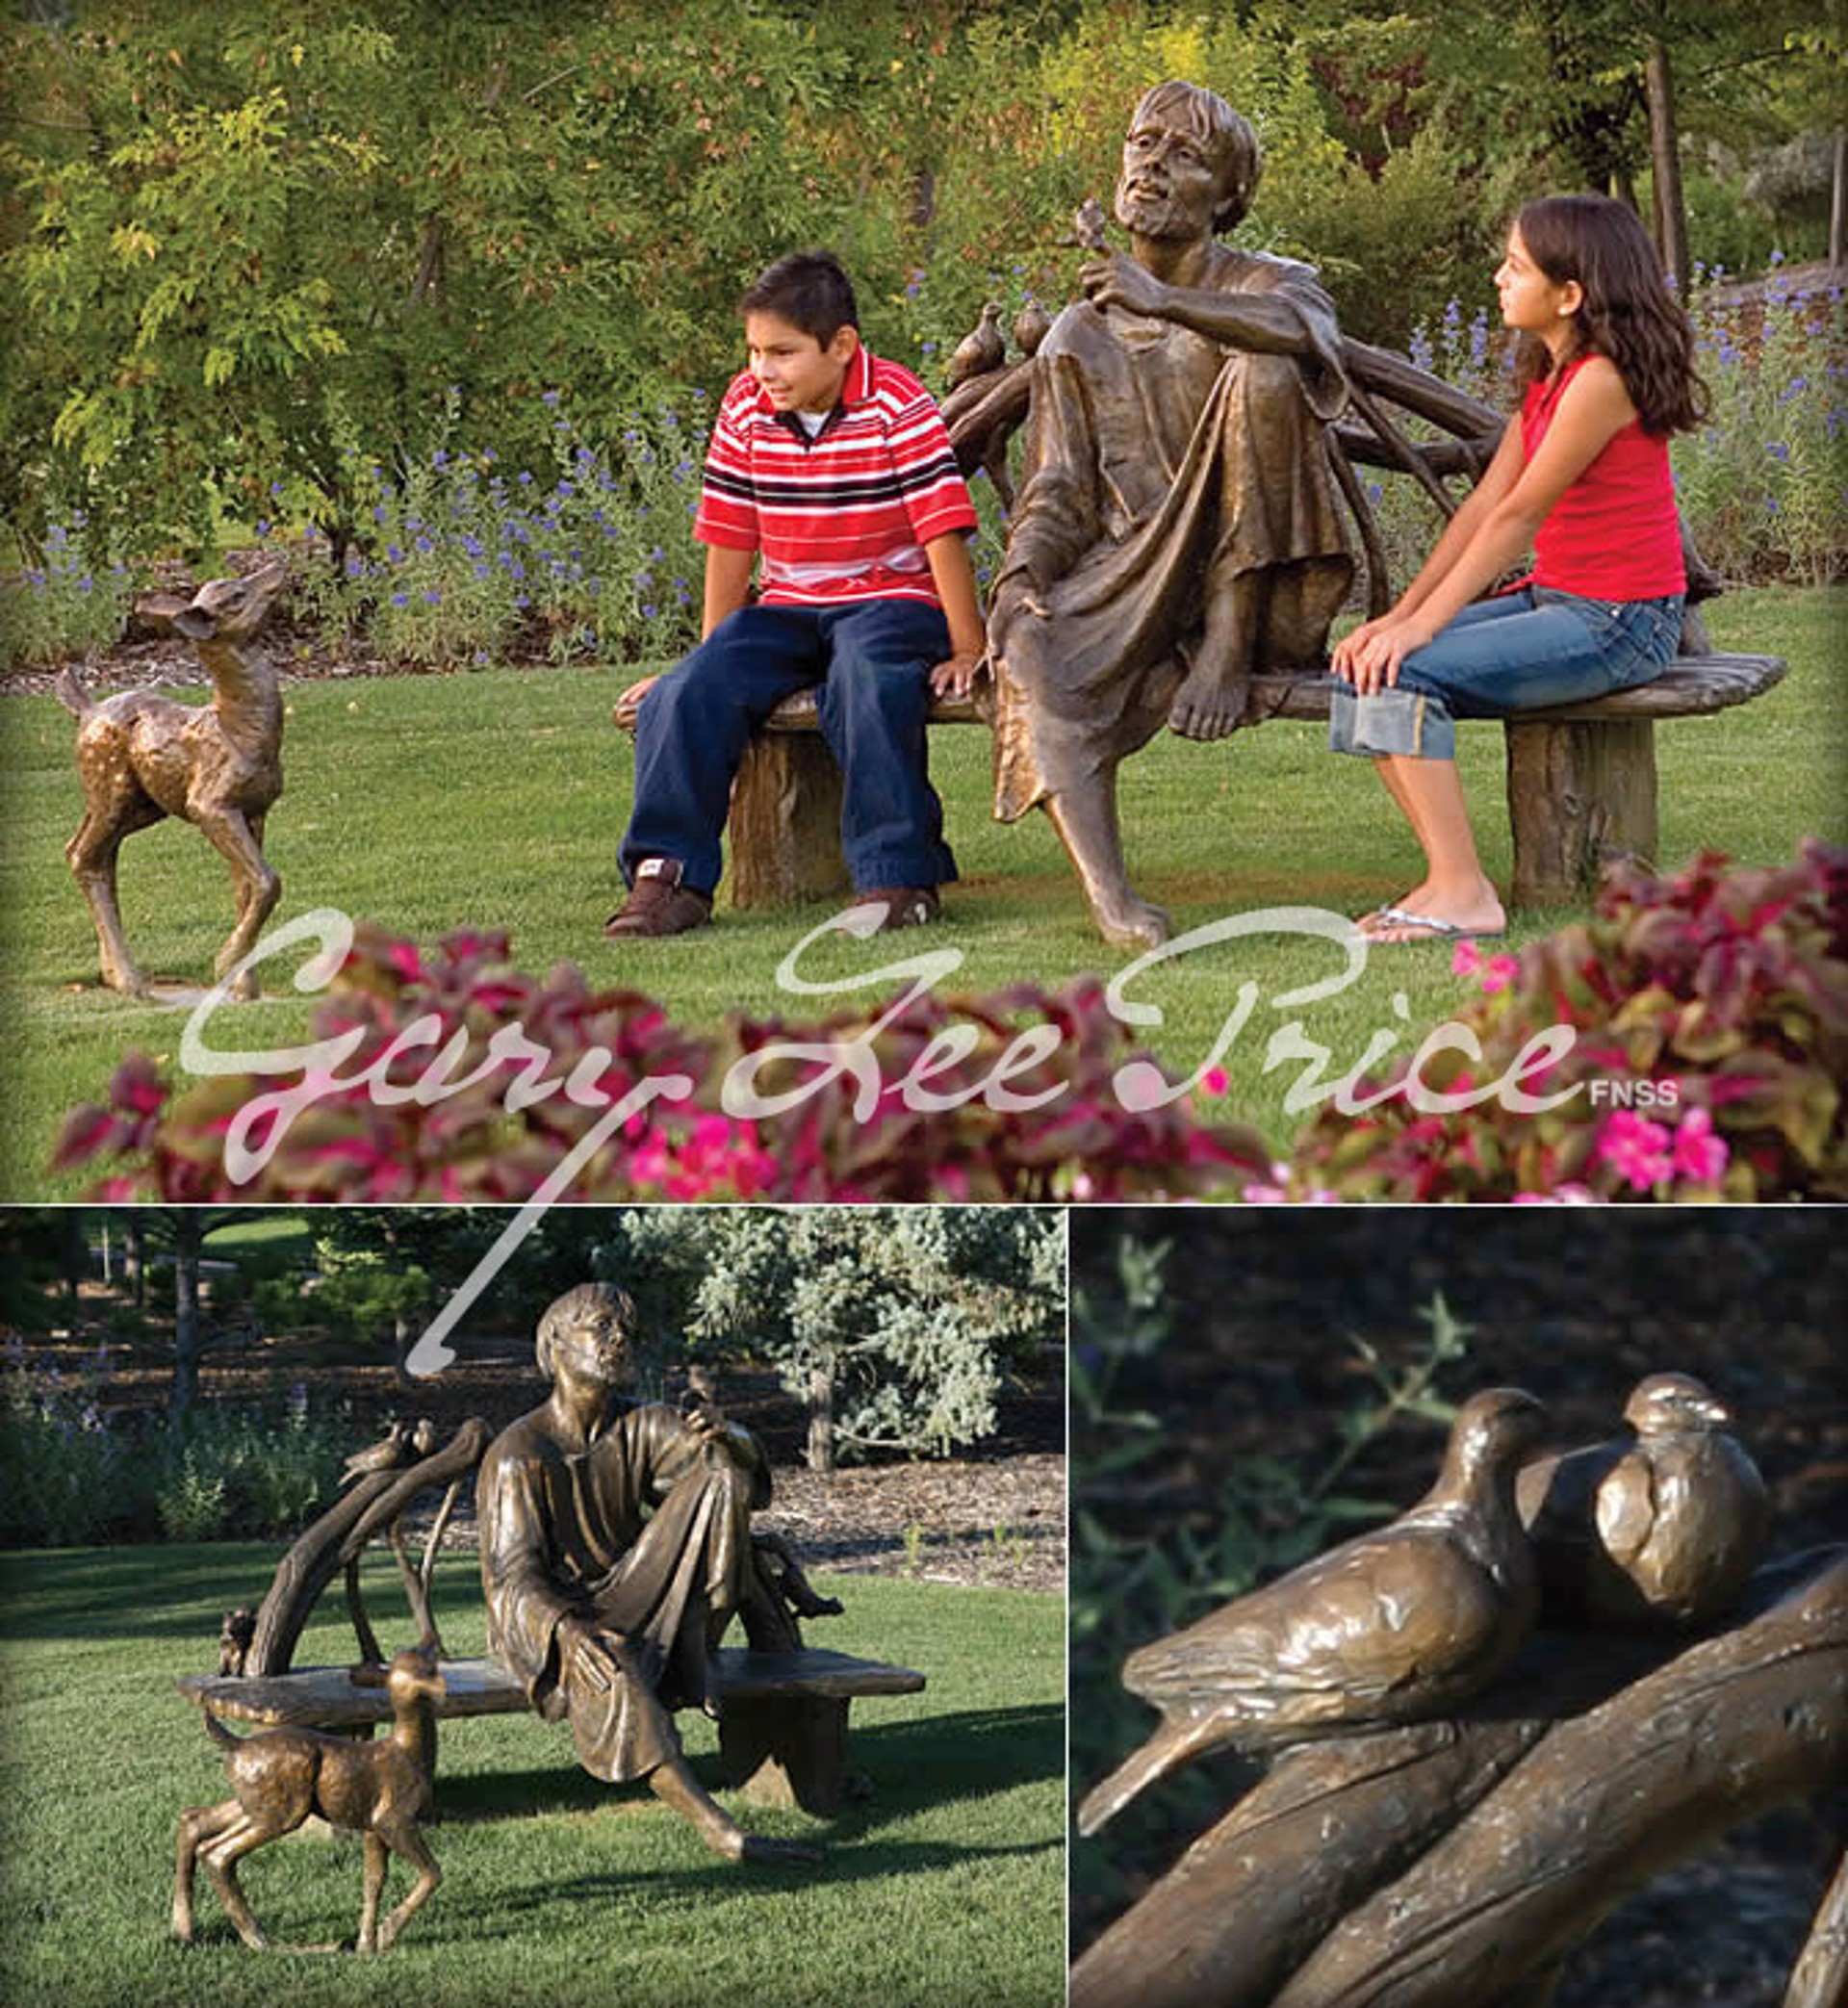 Saint Francis Bench by Gary Lee Price (sculptor)